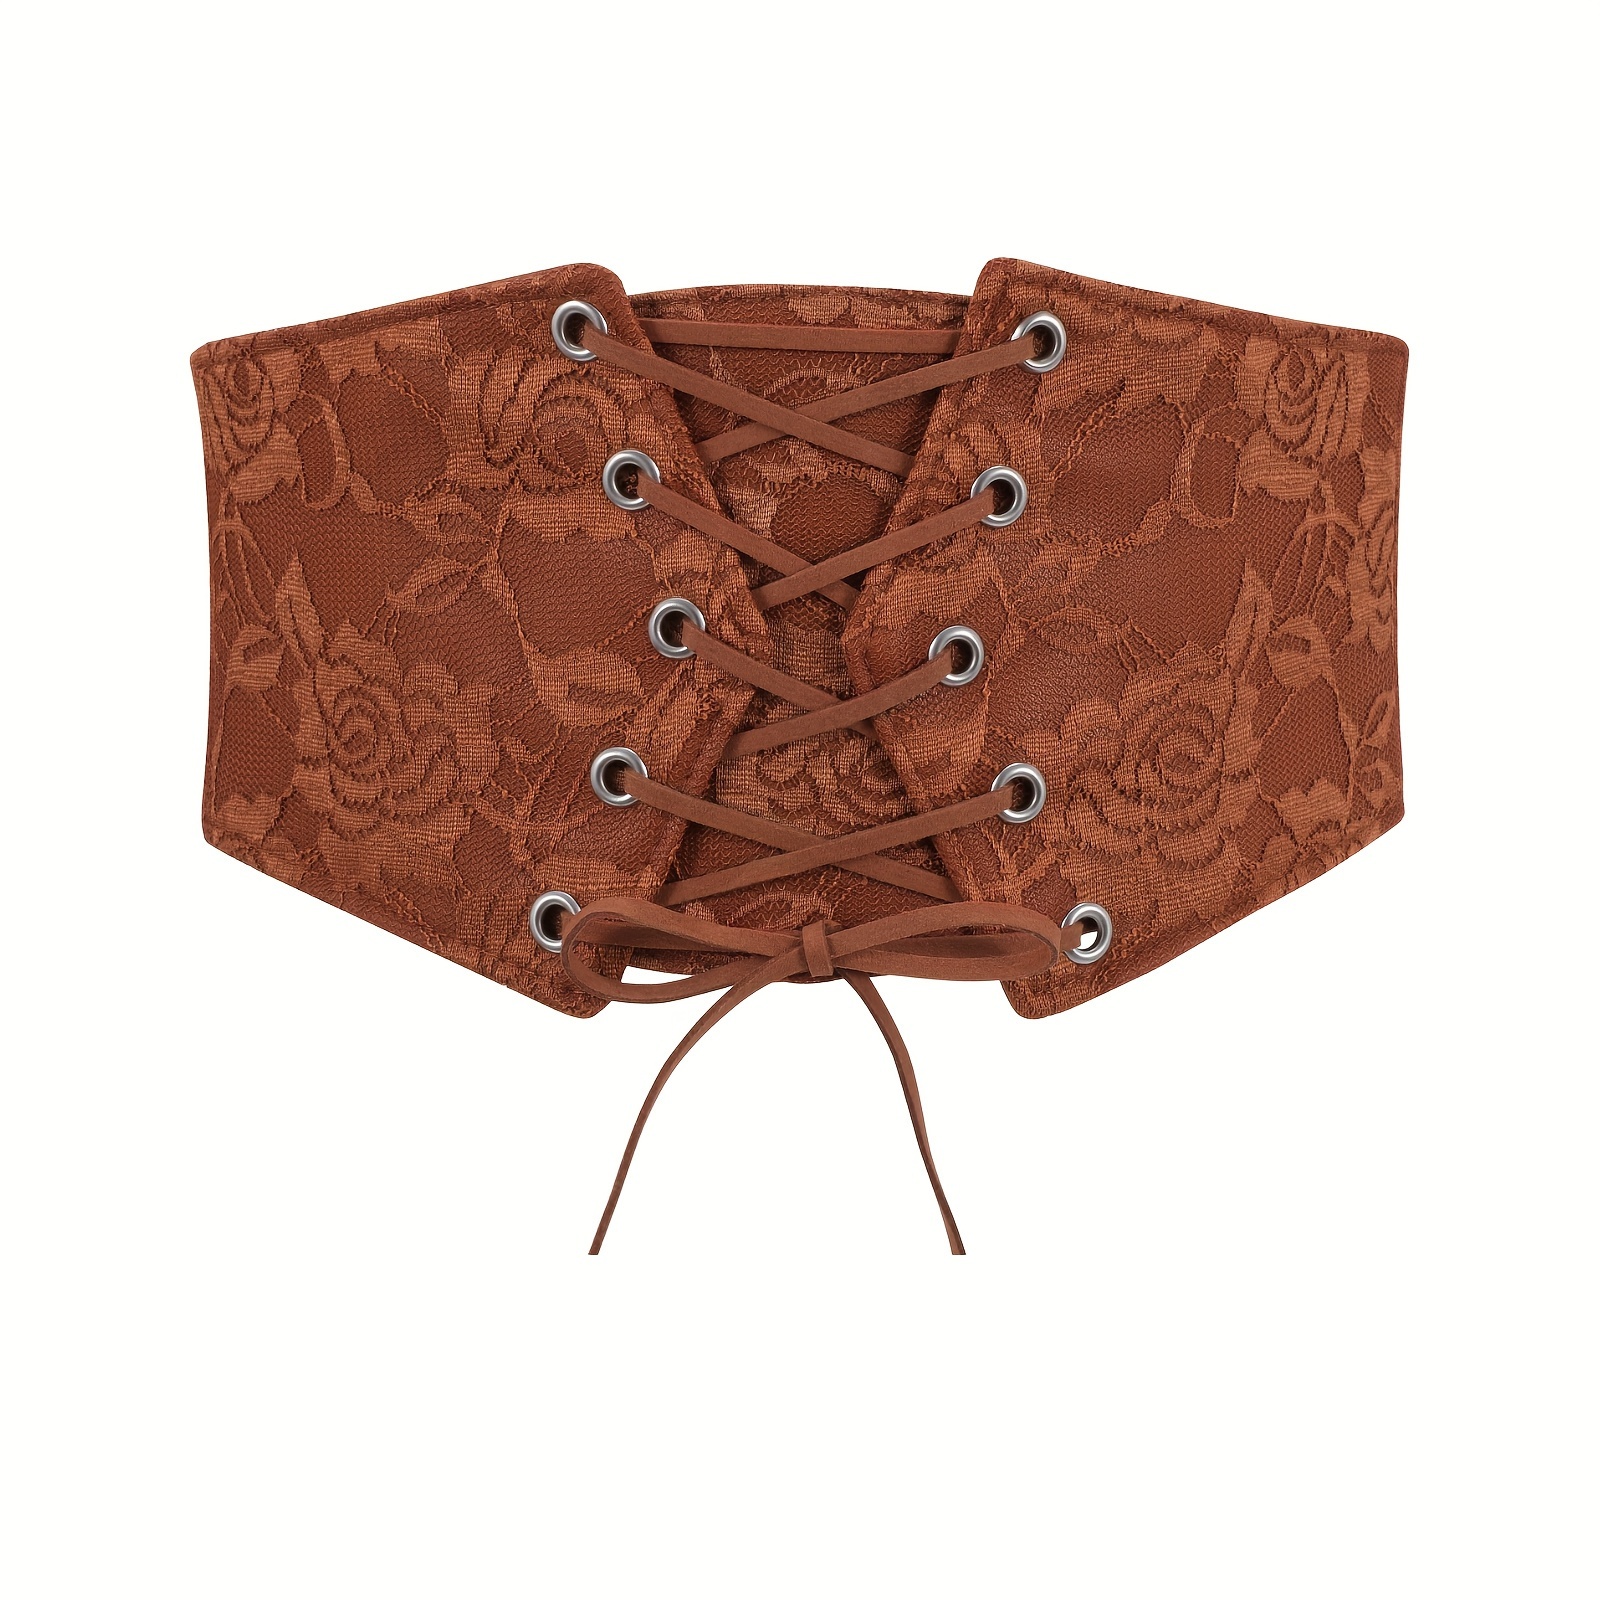 Wide Stretch Belt, Brown Leather Corset, Wide Leather Belt, Medieval  Elastic Corset Belt, All Sizes Available -  Canada